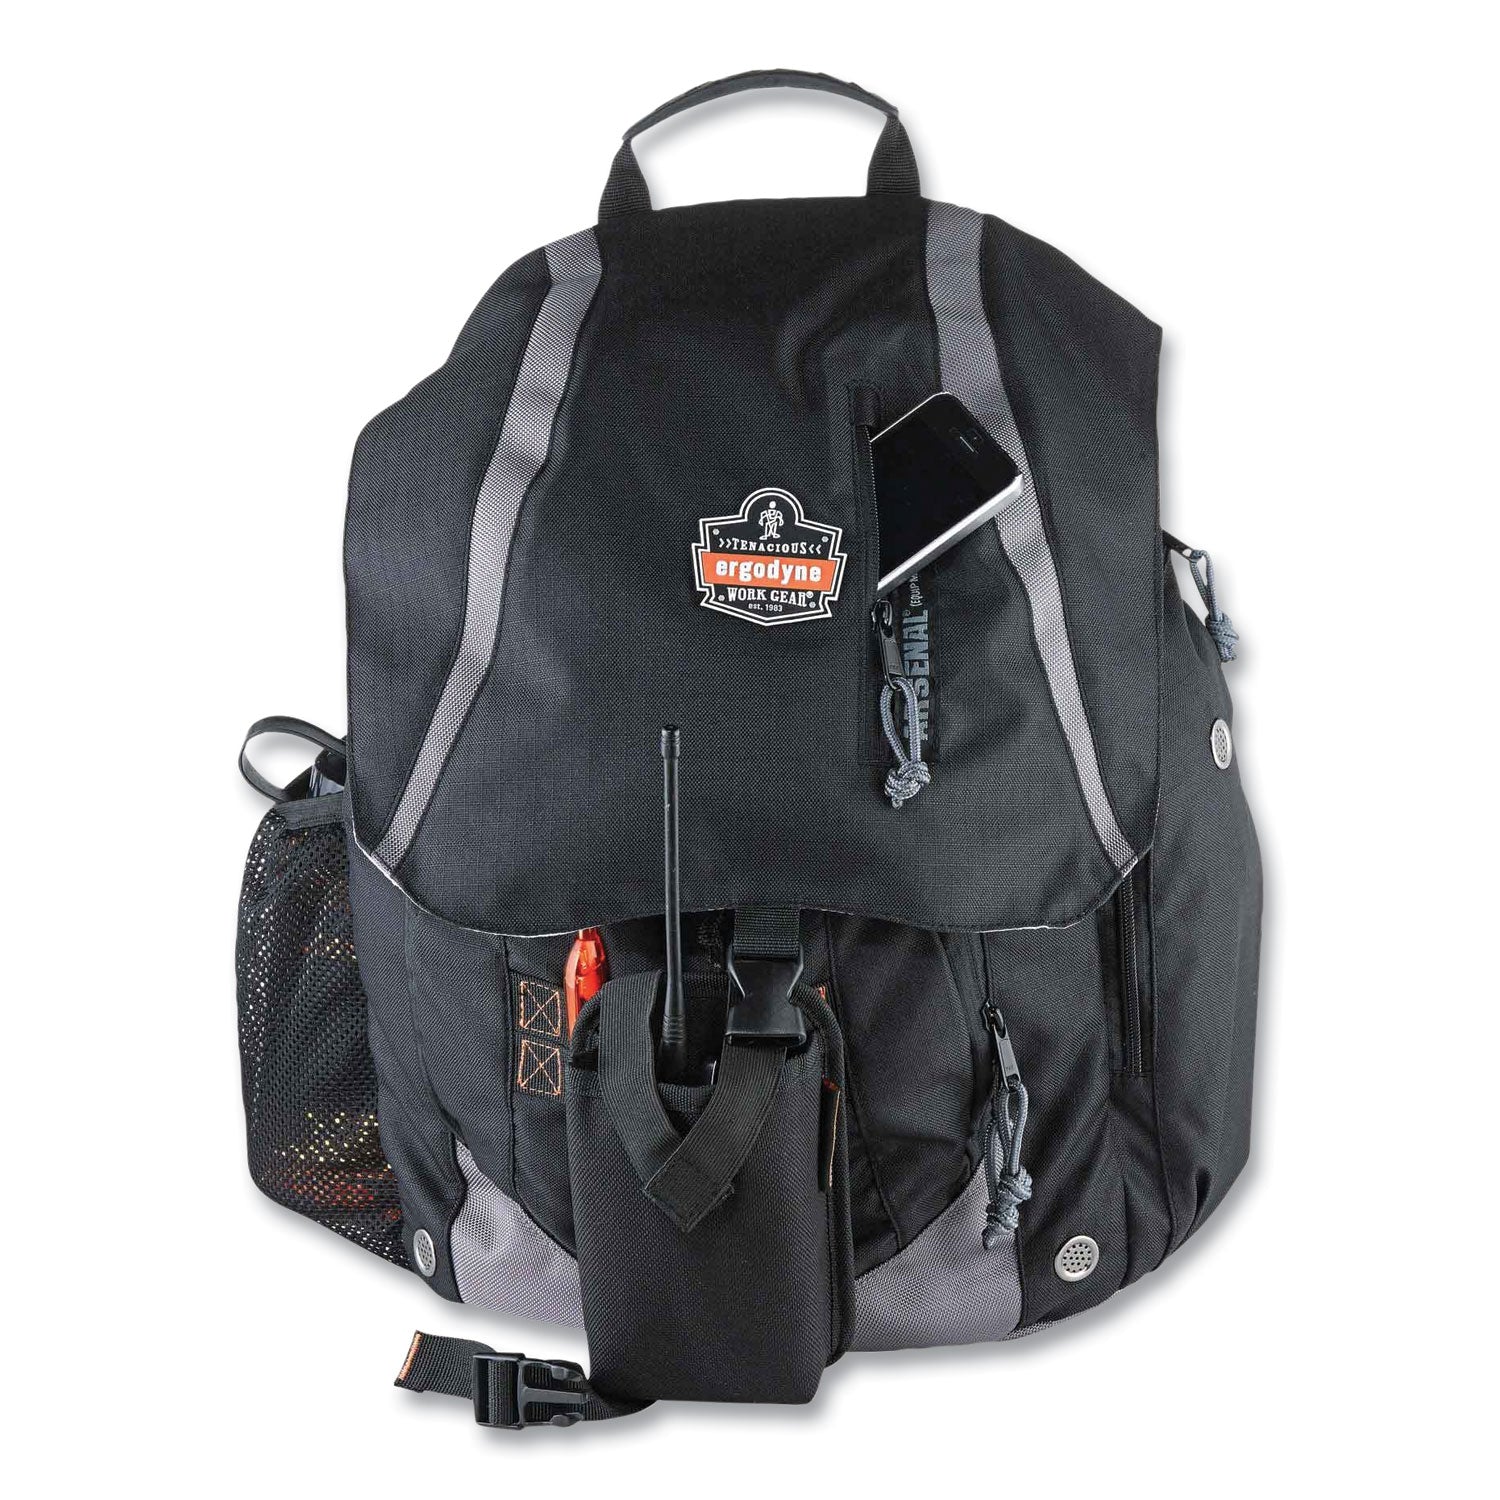 arsenal-5143-general-duty-gear-backpack-8-x-15-x-19-black-ships-in-1-3-business-days_ego13043 - 3